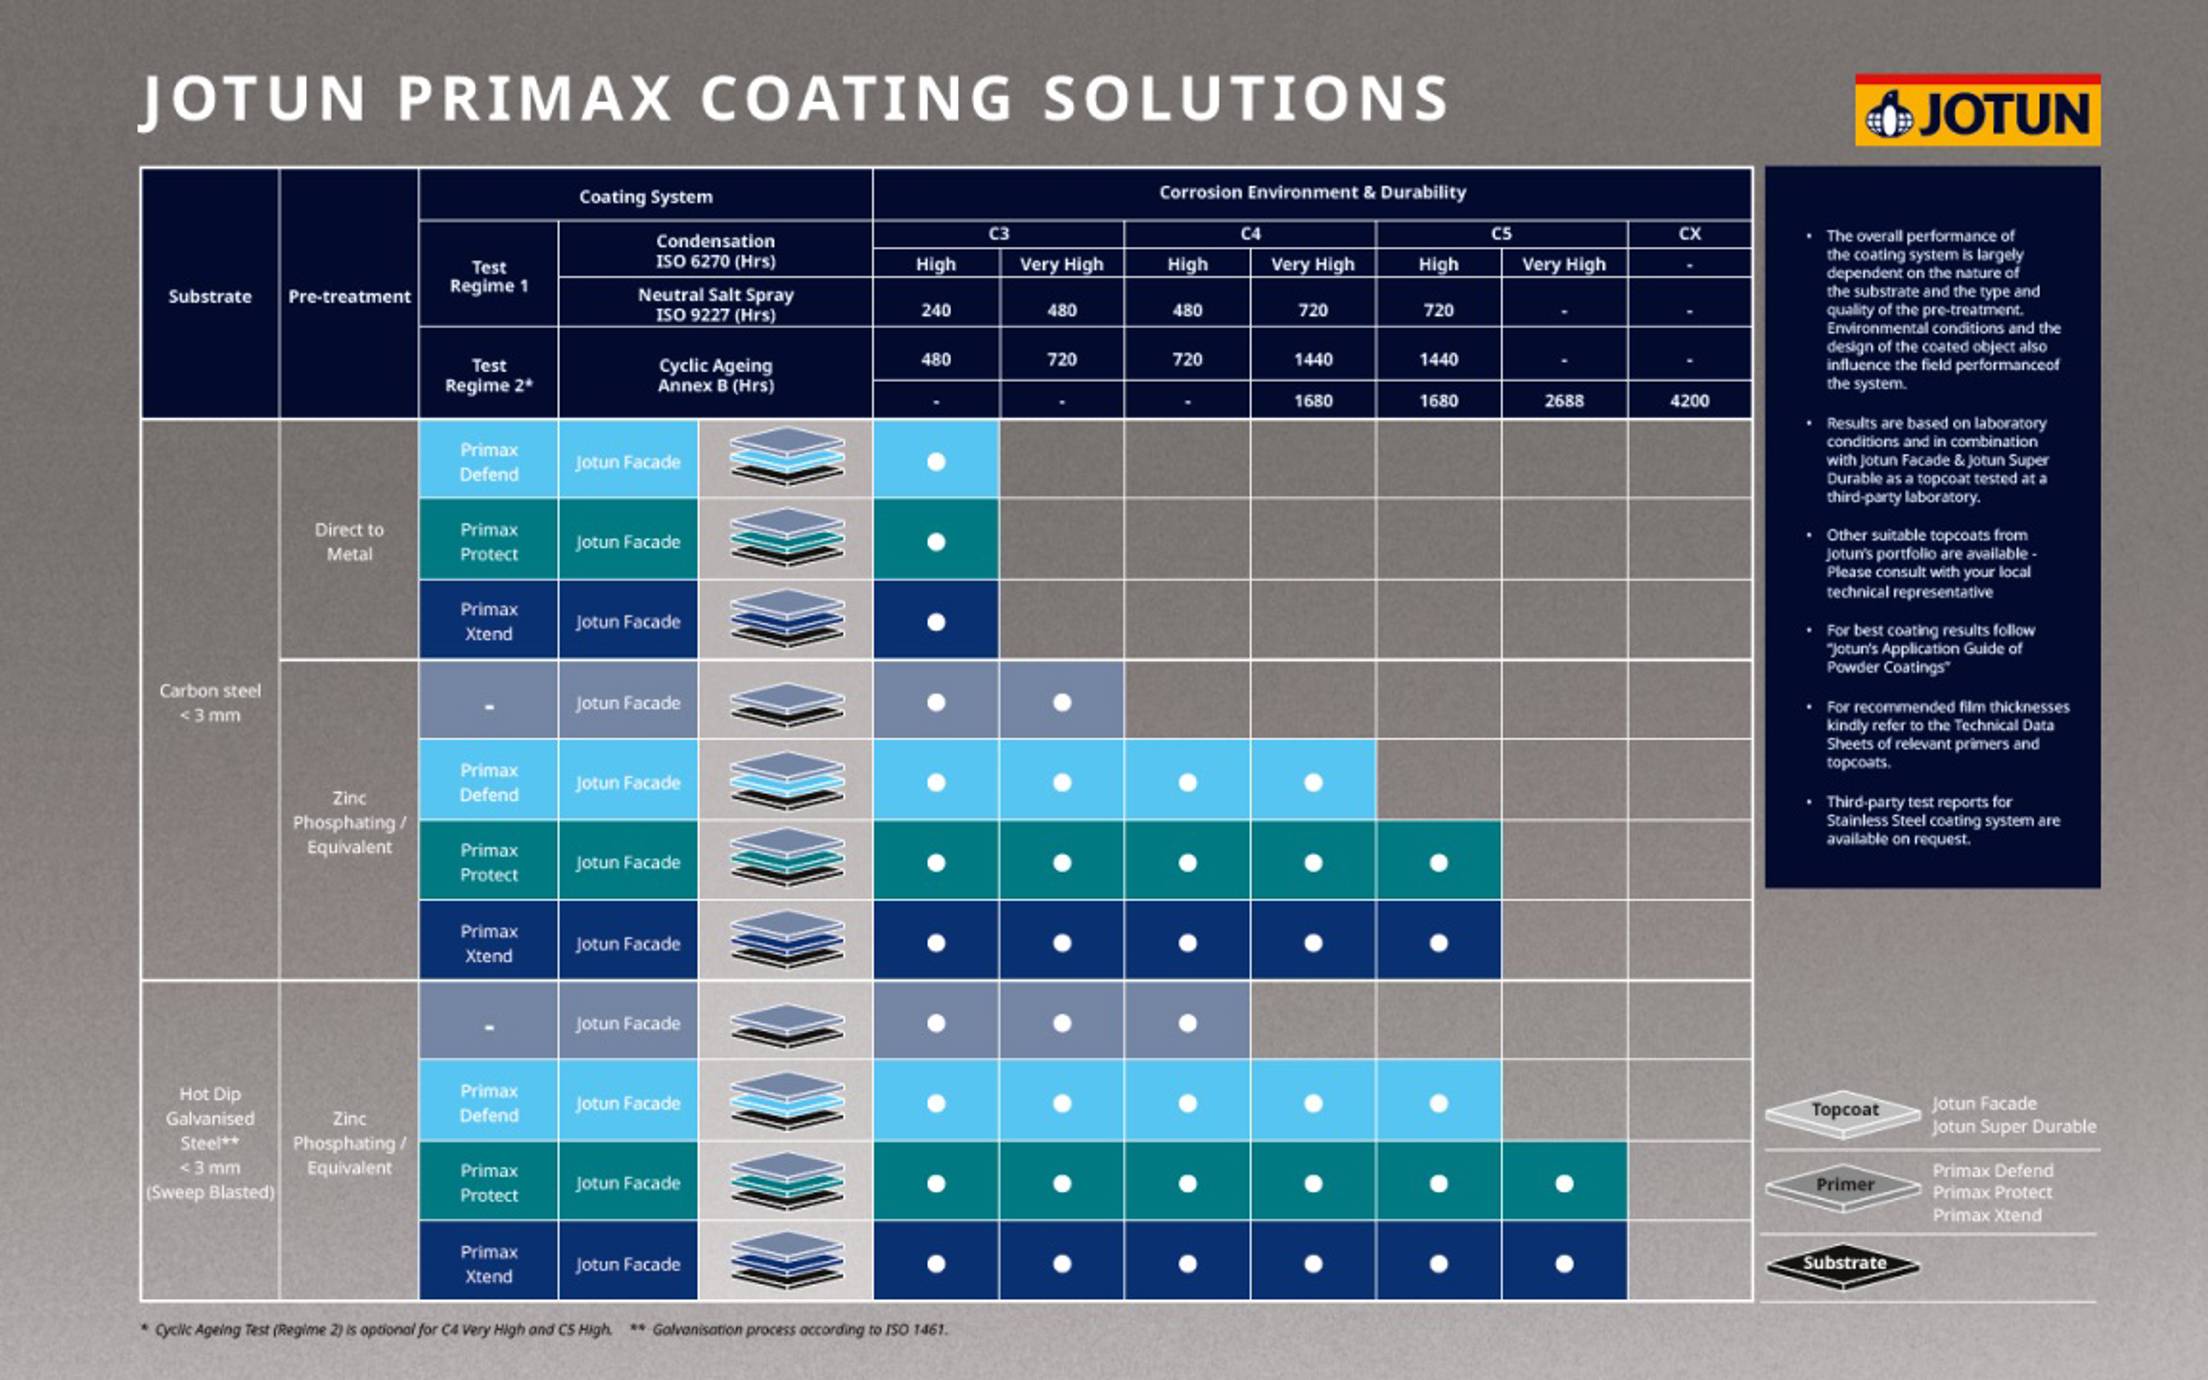 Primax systems